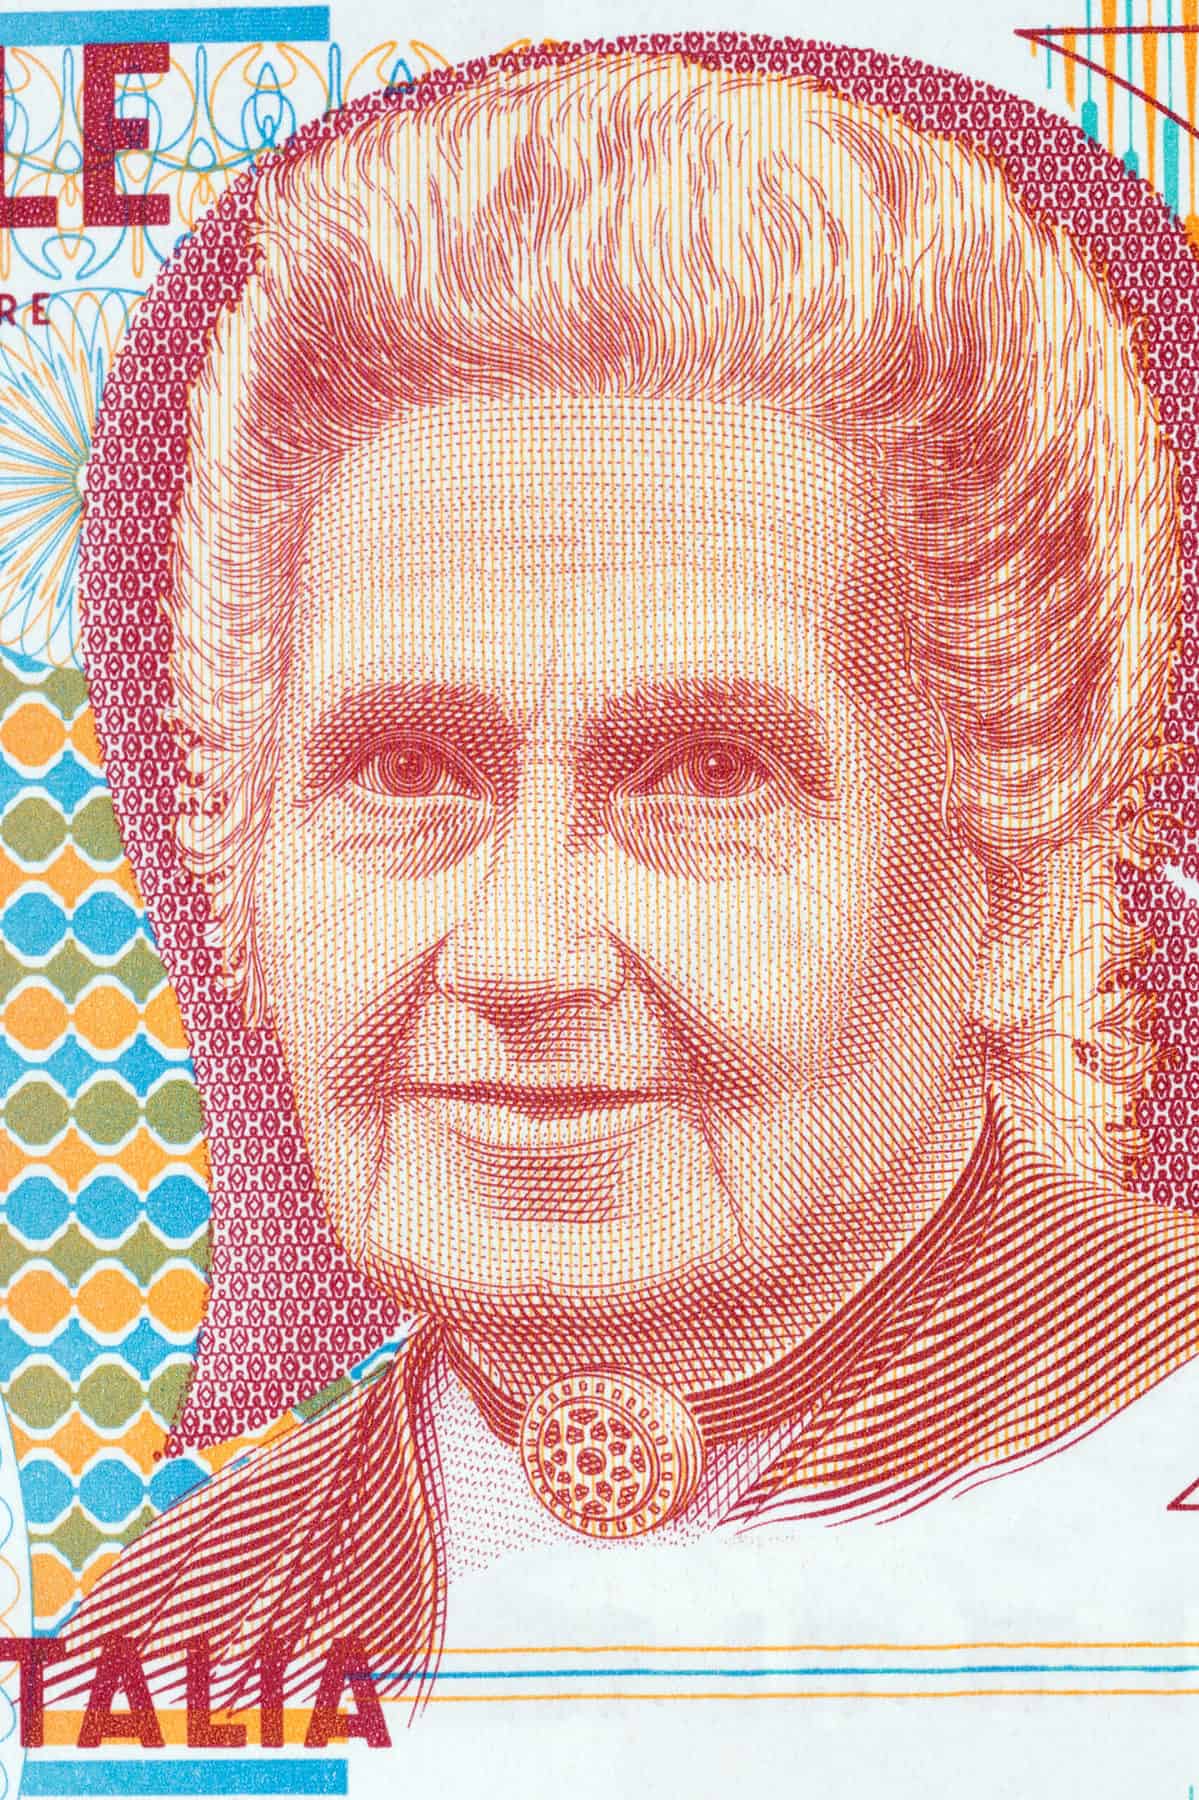 An engraving /etcing of Maris Montessori on an Italian bank note. She is etched in deep red and ecru. Yellow, olive and light blue dots and diamonds are visible to her left. The word TALIA is visible in the lower left frame. The I was apparently cropped out of the photo. oops.